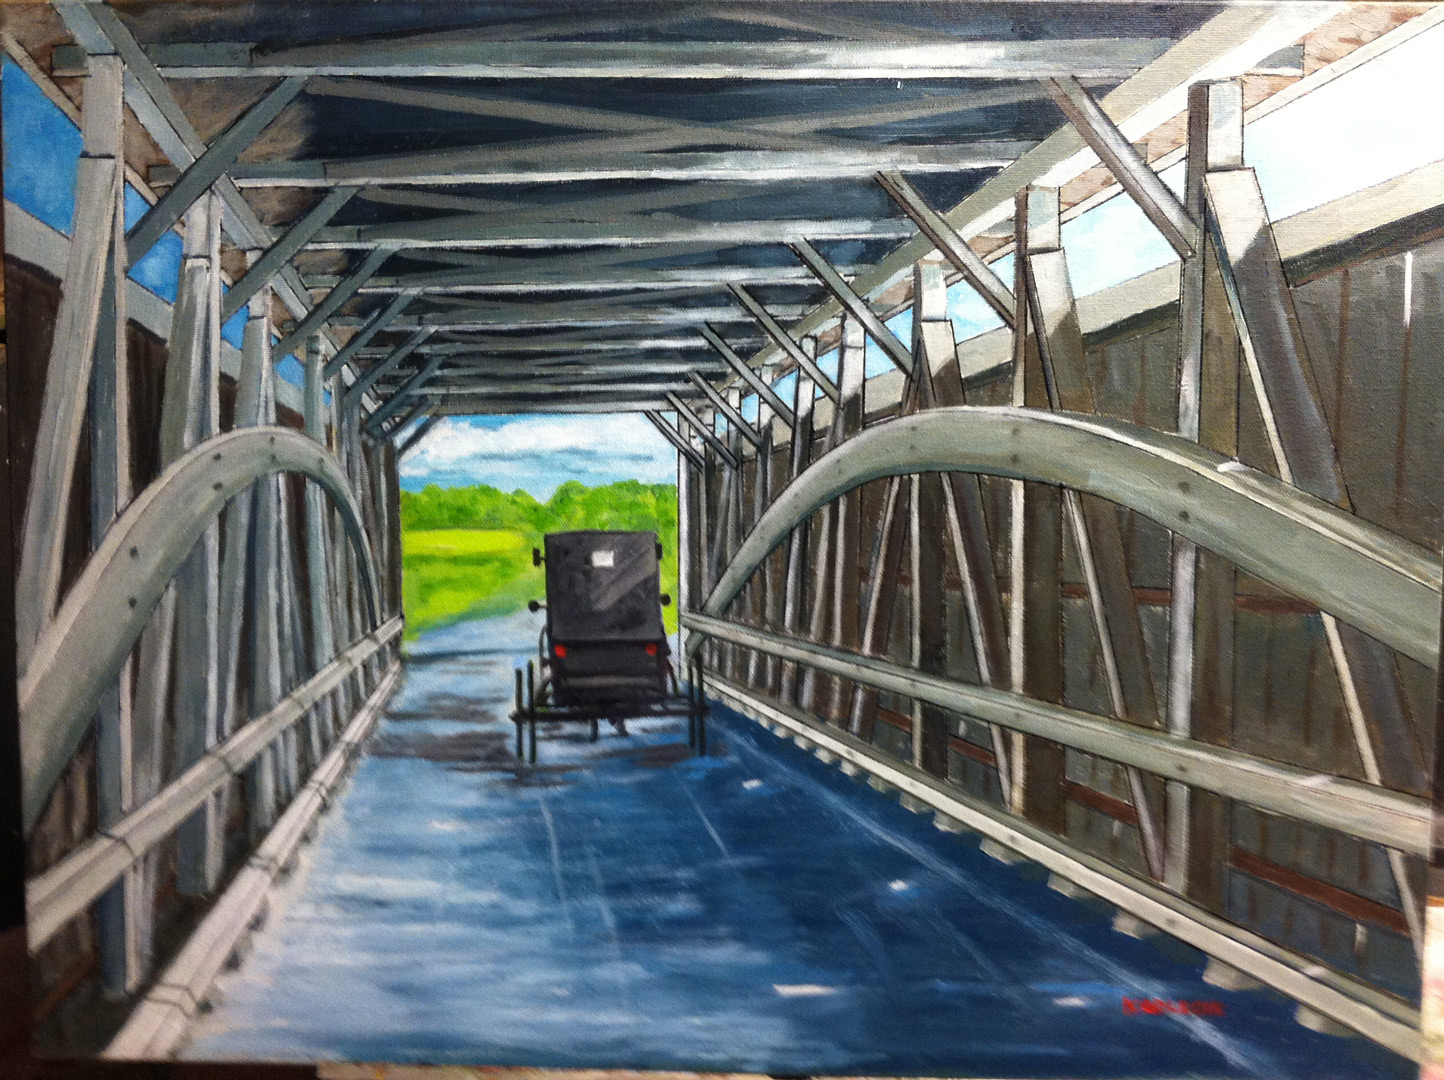 An Amish buggy rolling down a covered bridge.